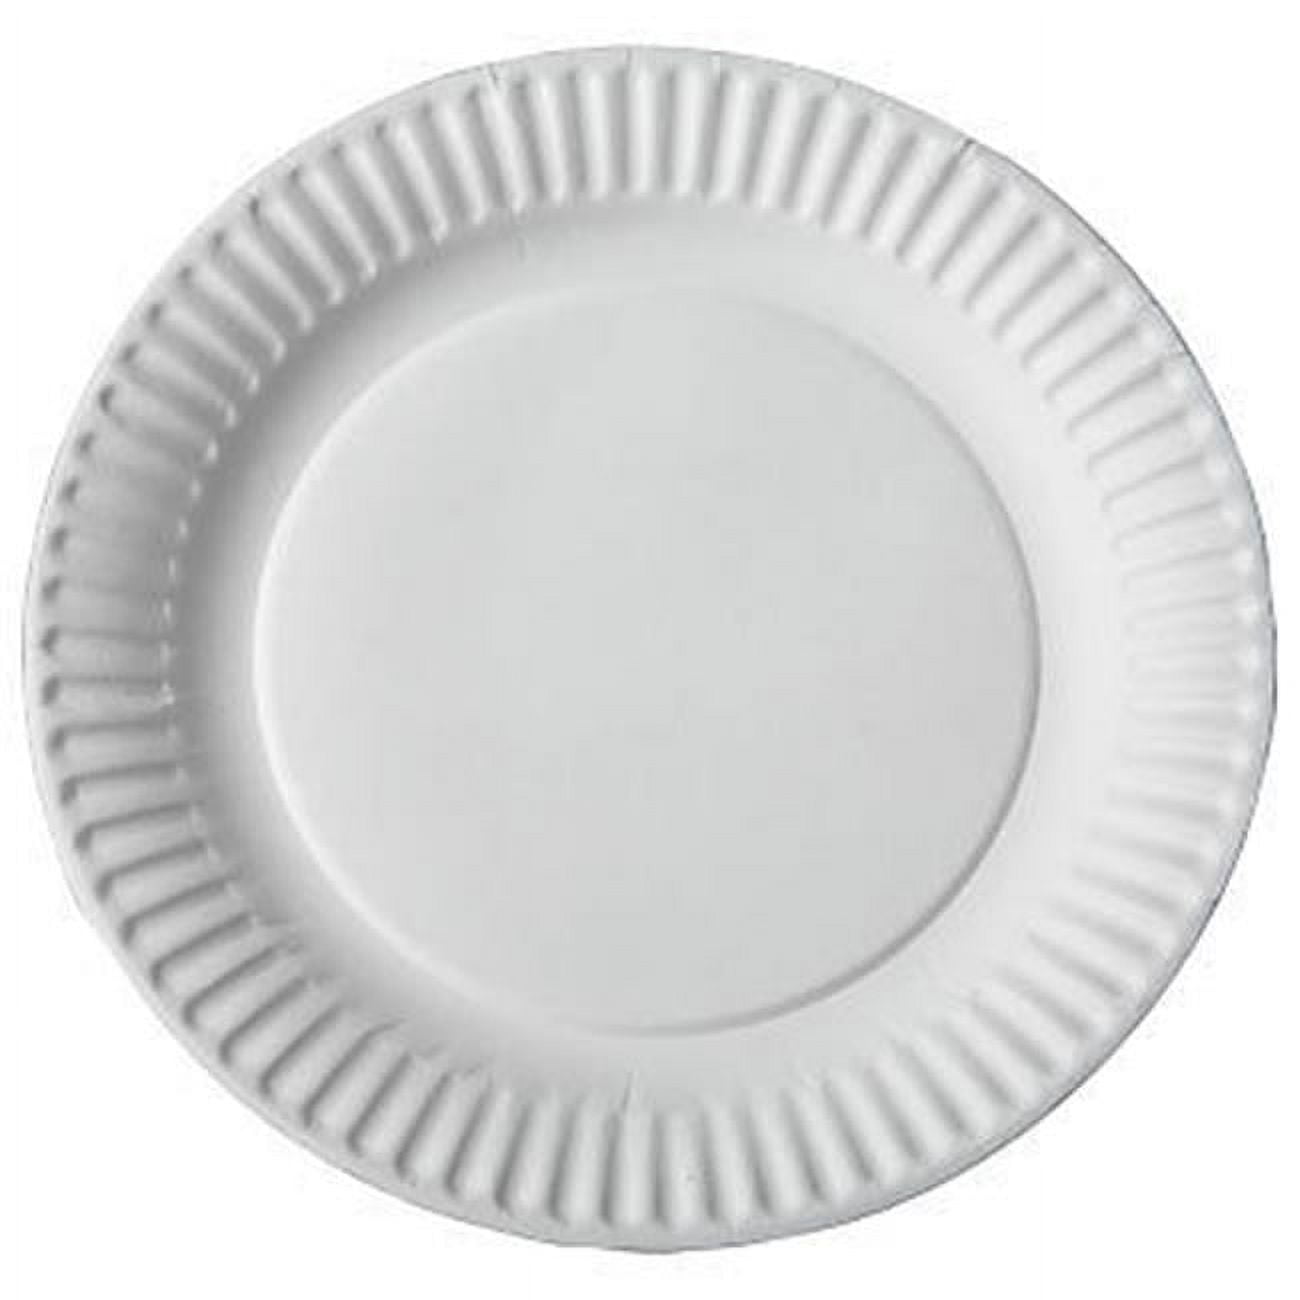 12 Pieces 100 Count White Paper Plates 9 Inch By Eilat - Disposable Plates  & Bowls - at 